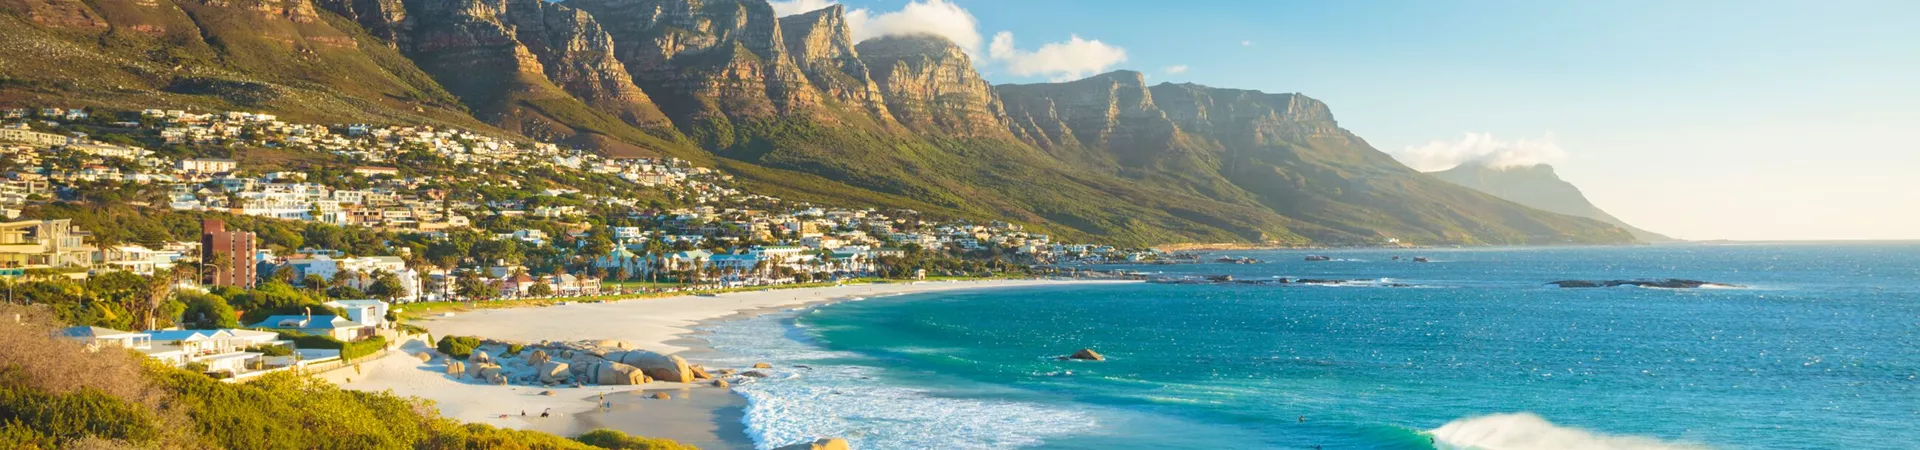 Twelve Apostles Mountain In Camps Bay, Cape Town, South Africa